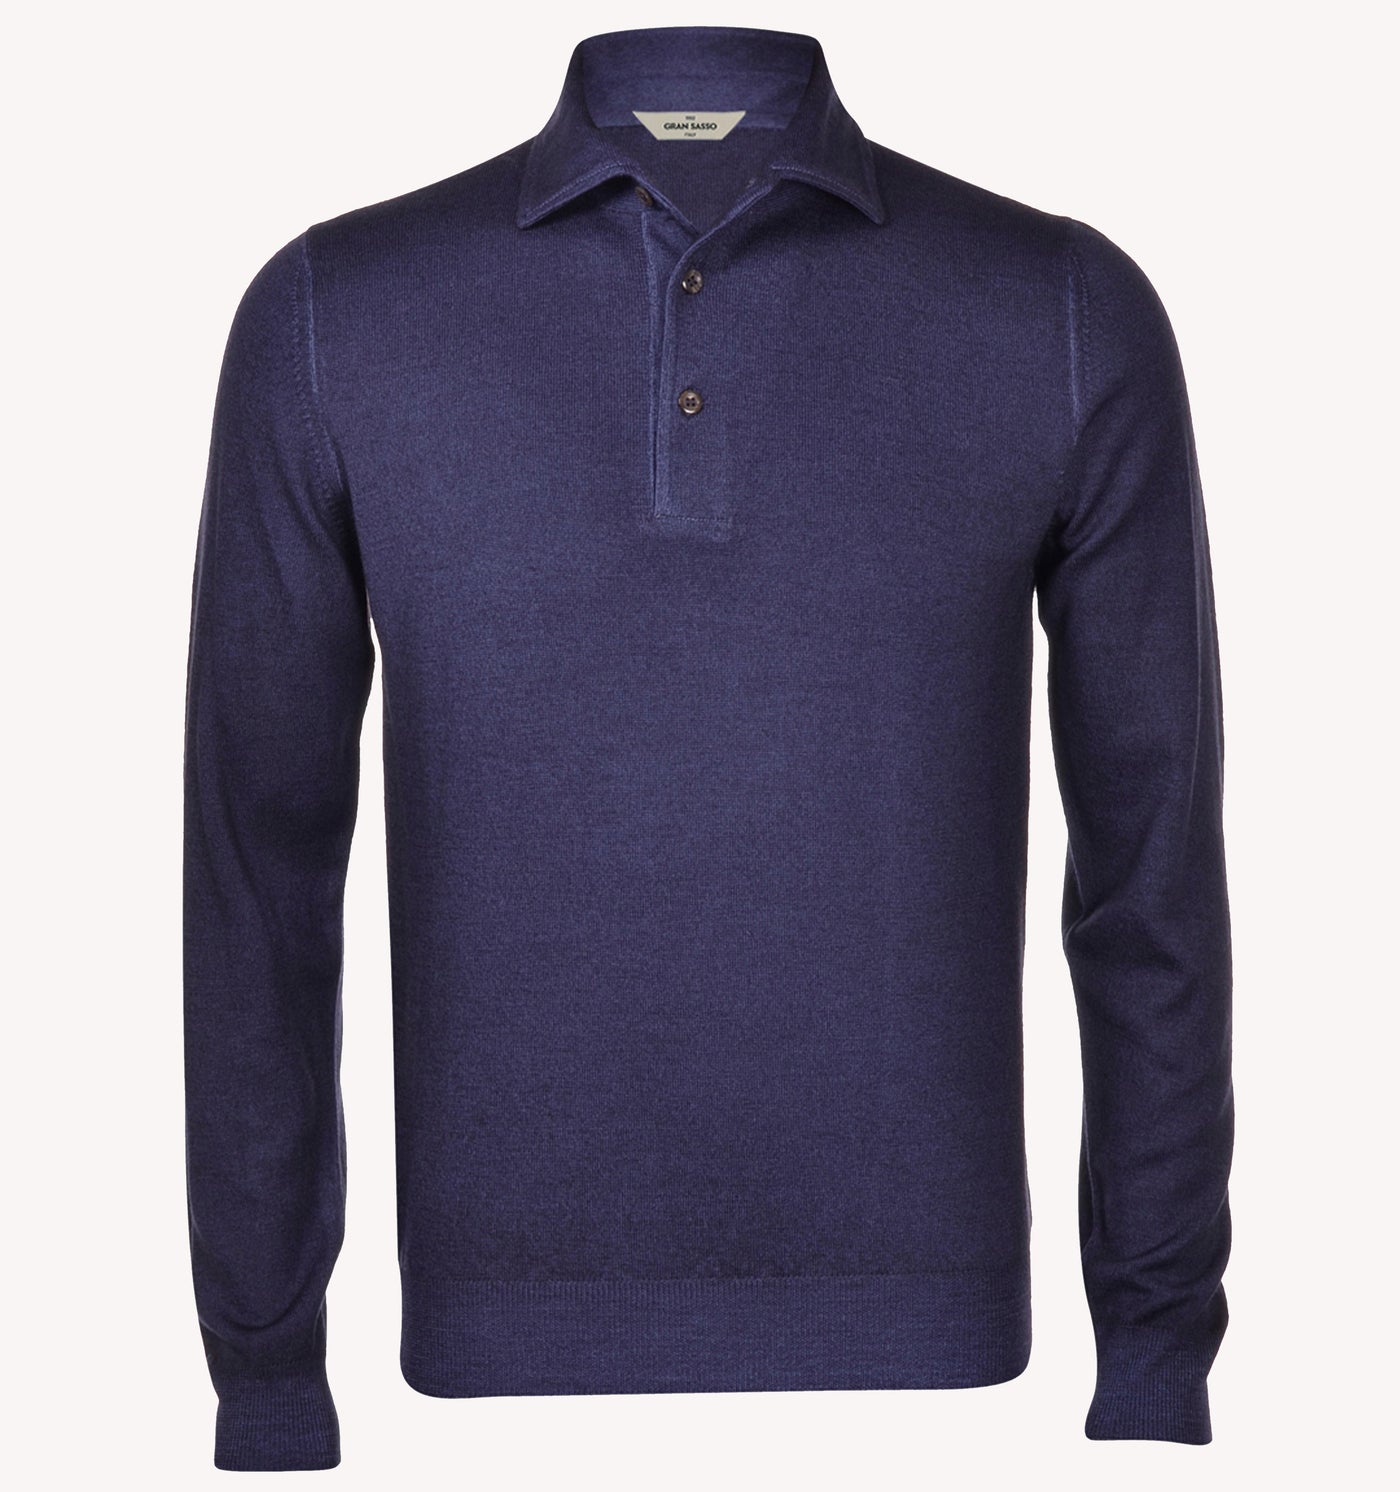 Gran Sasso Knit Polo in Navy